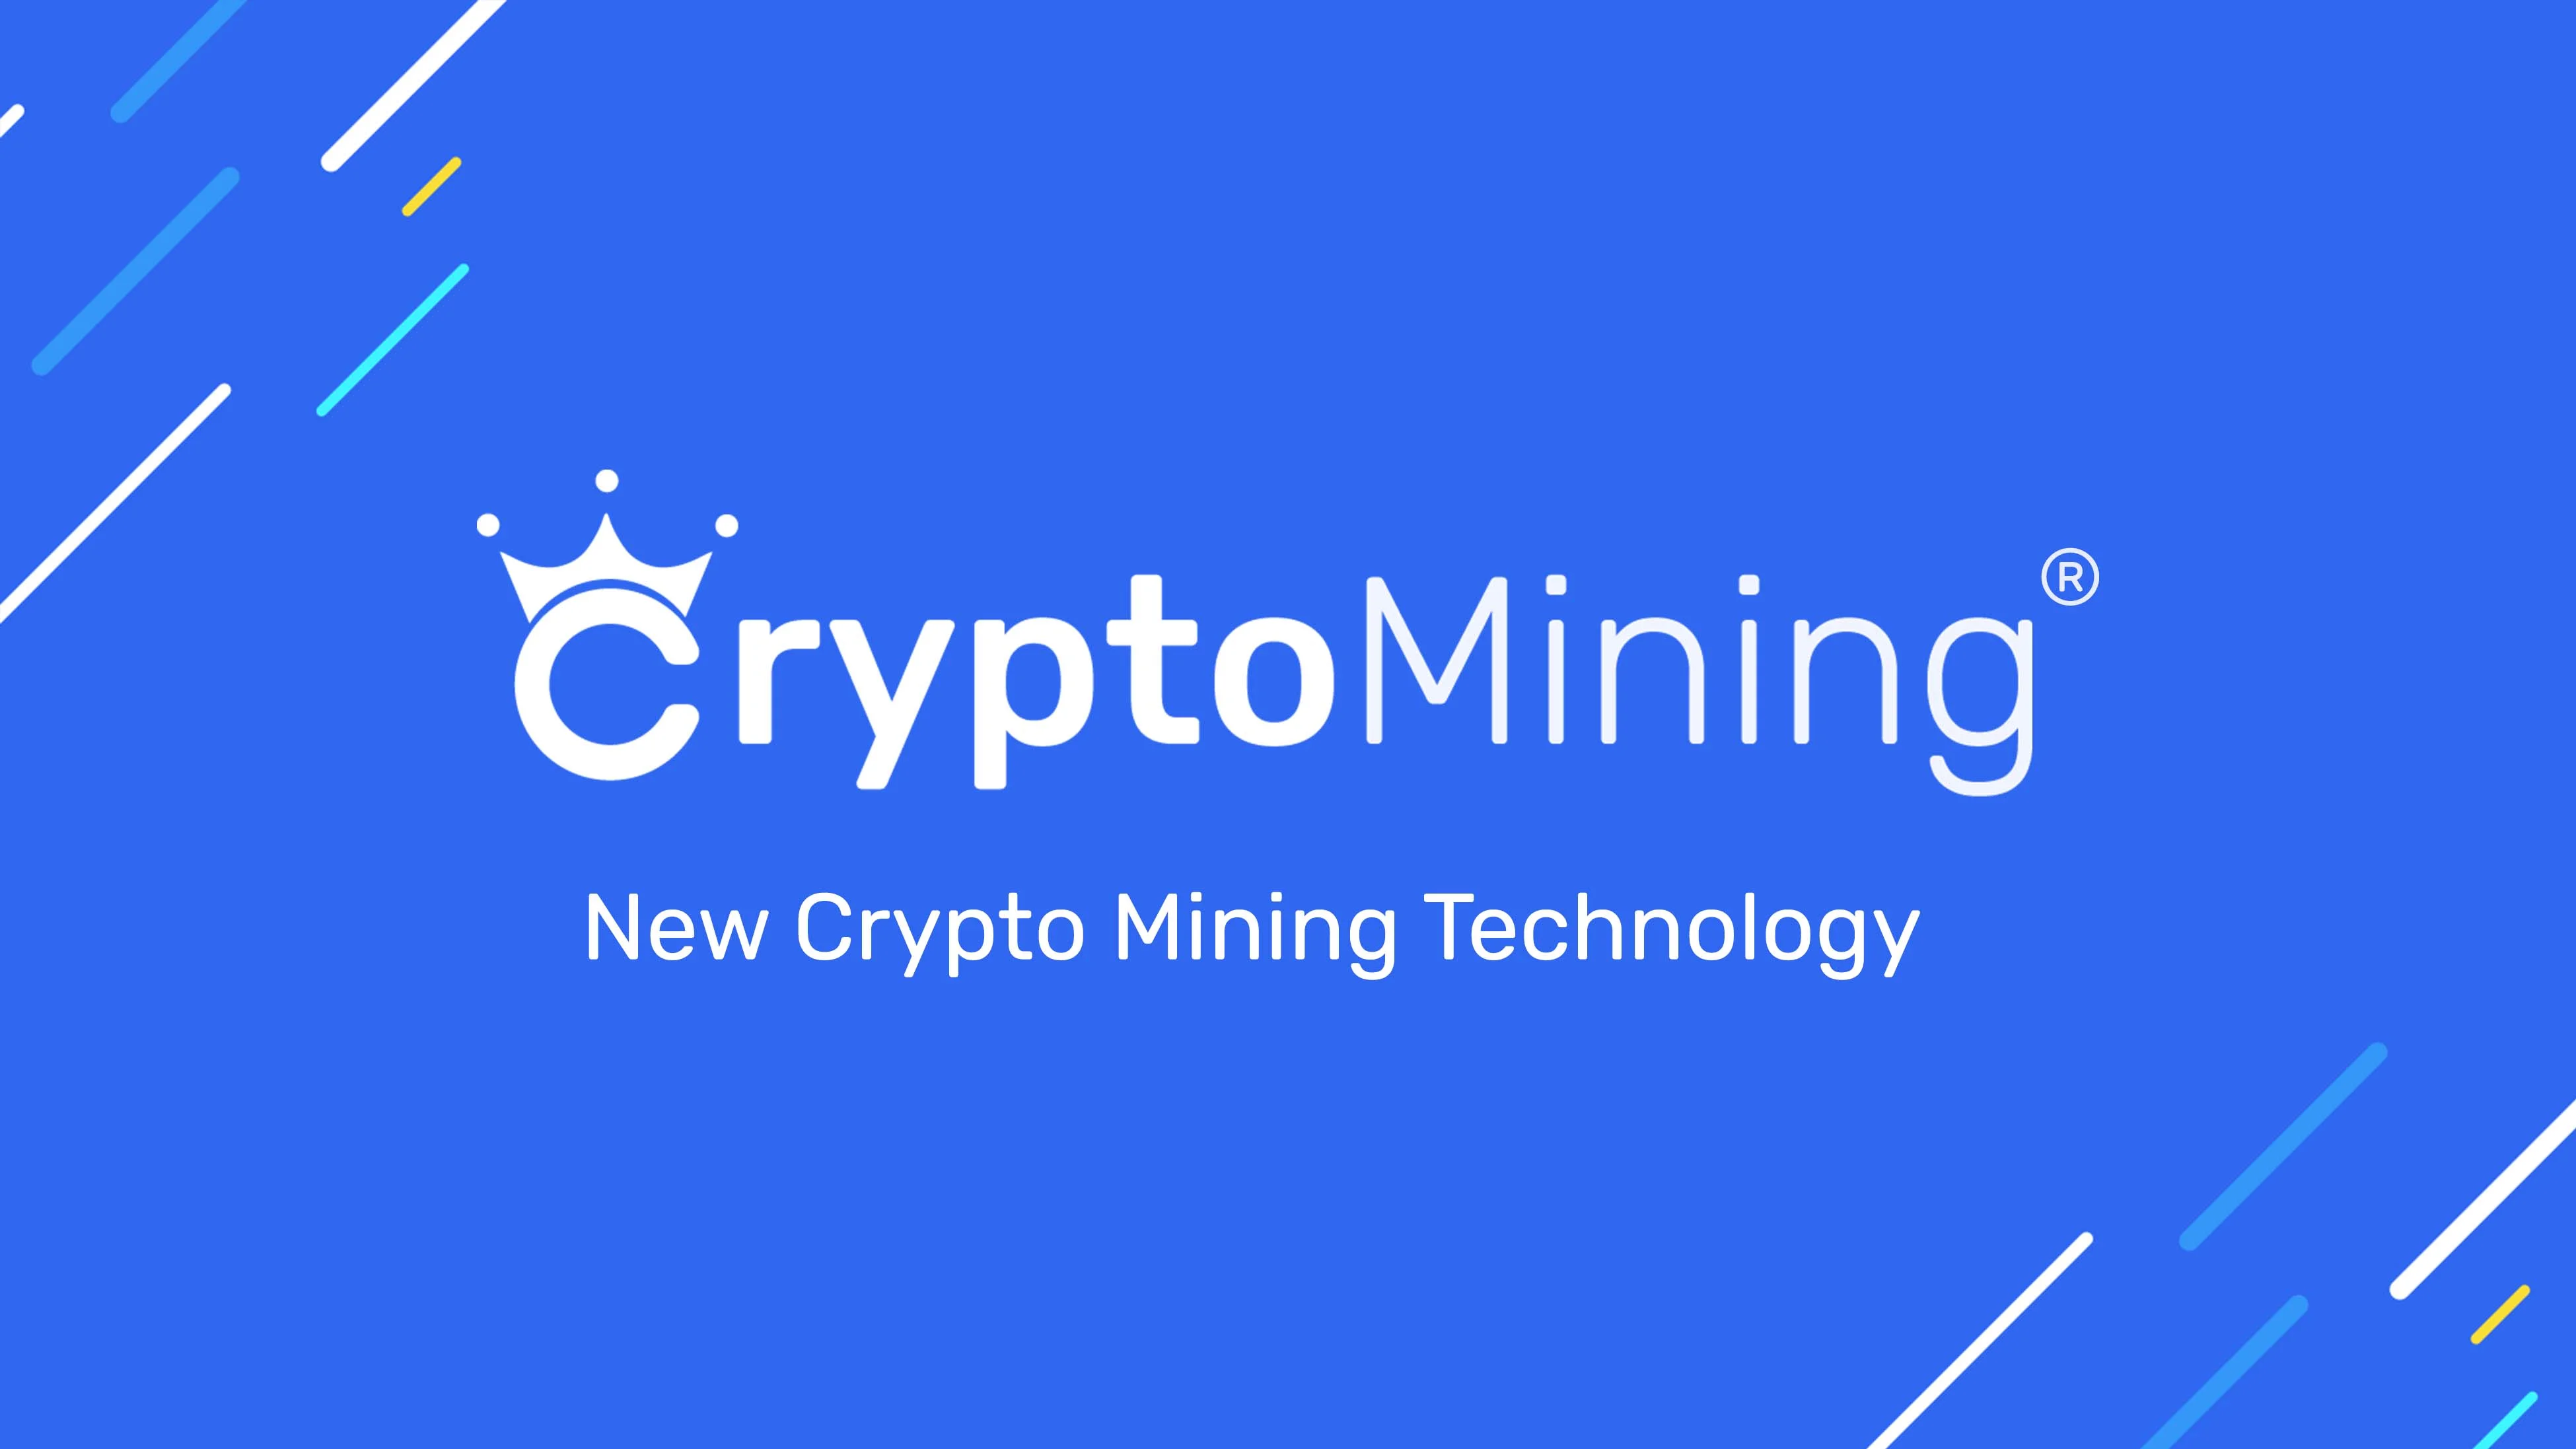 Crypto Mining Best: The Free Platform for Cryptocurrency Mining